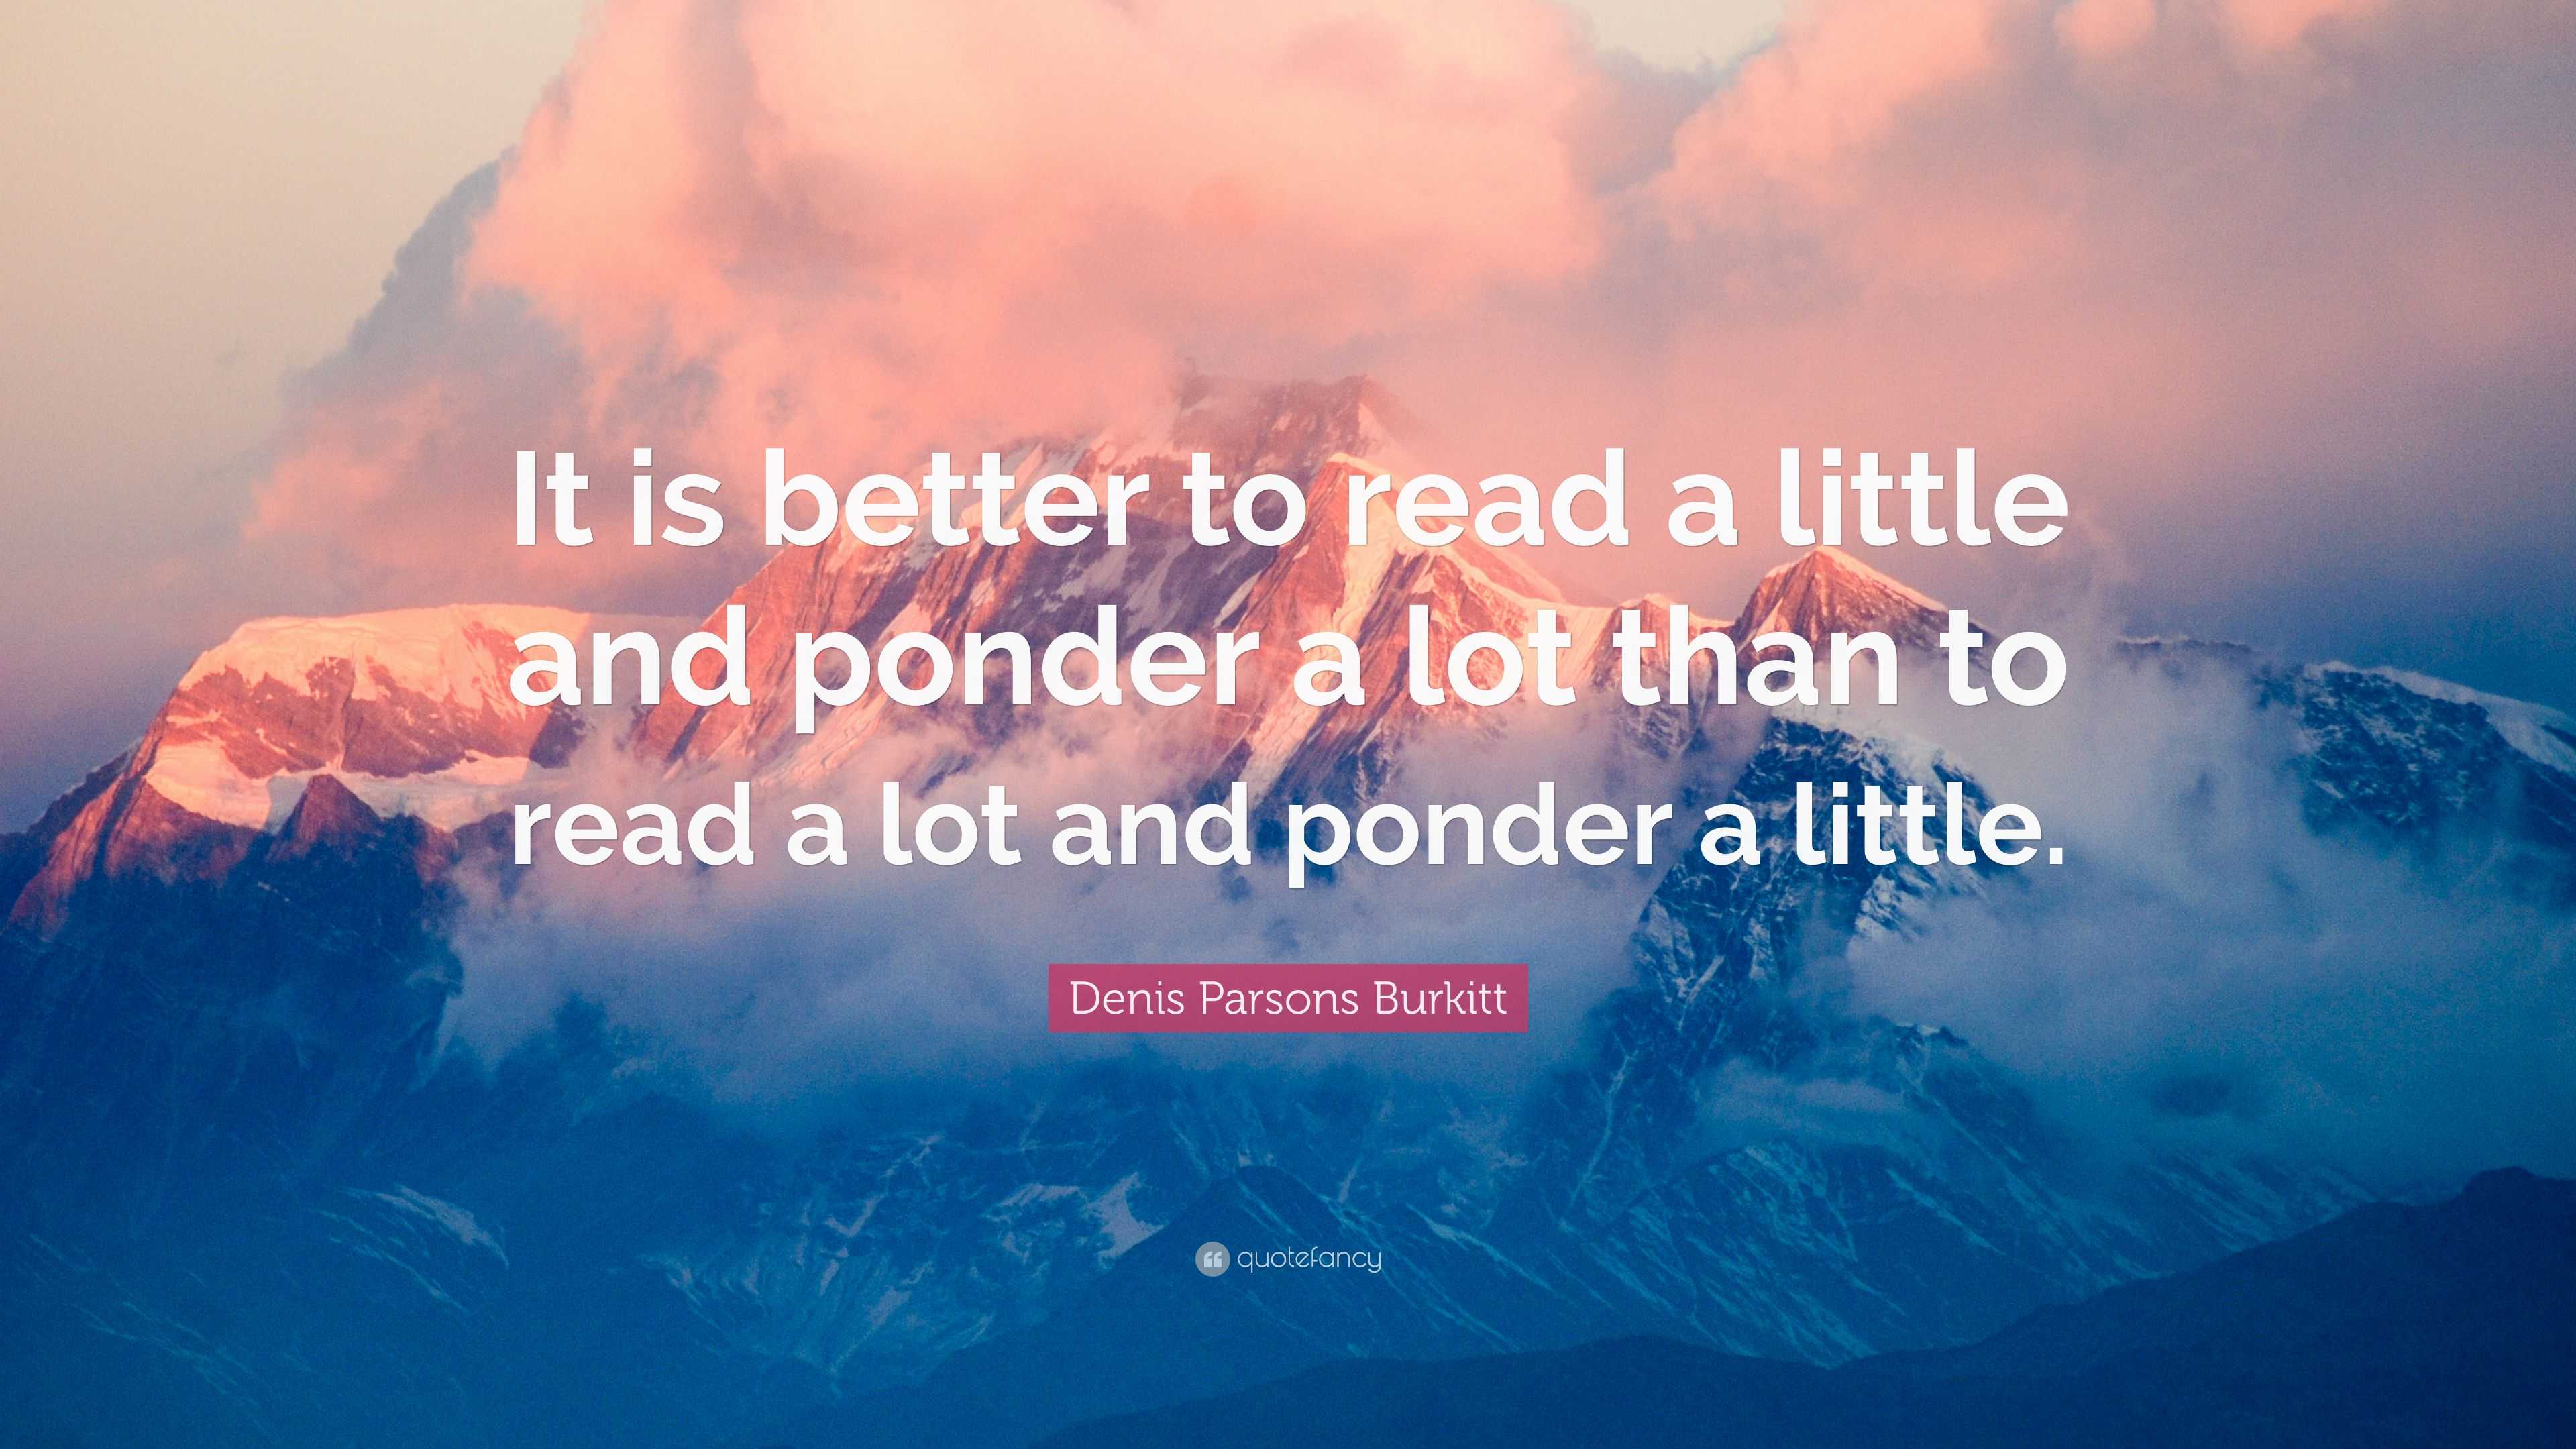 Denis Parsons Burkitt Quote: “It is better to read a little and ponder ...